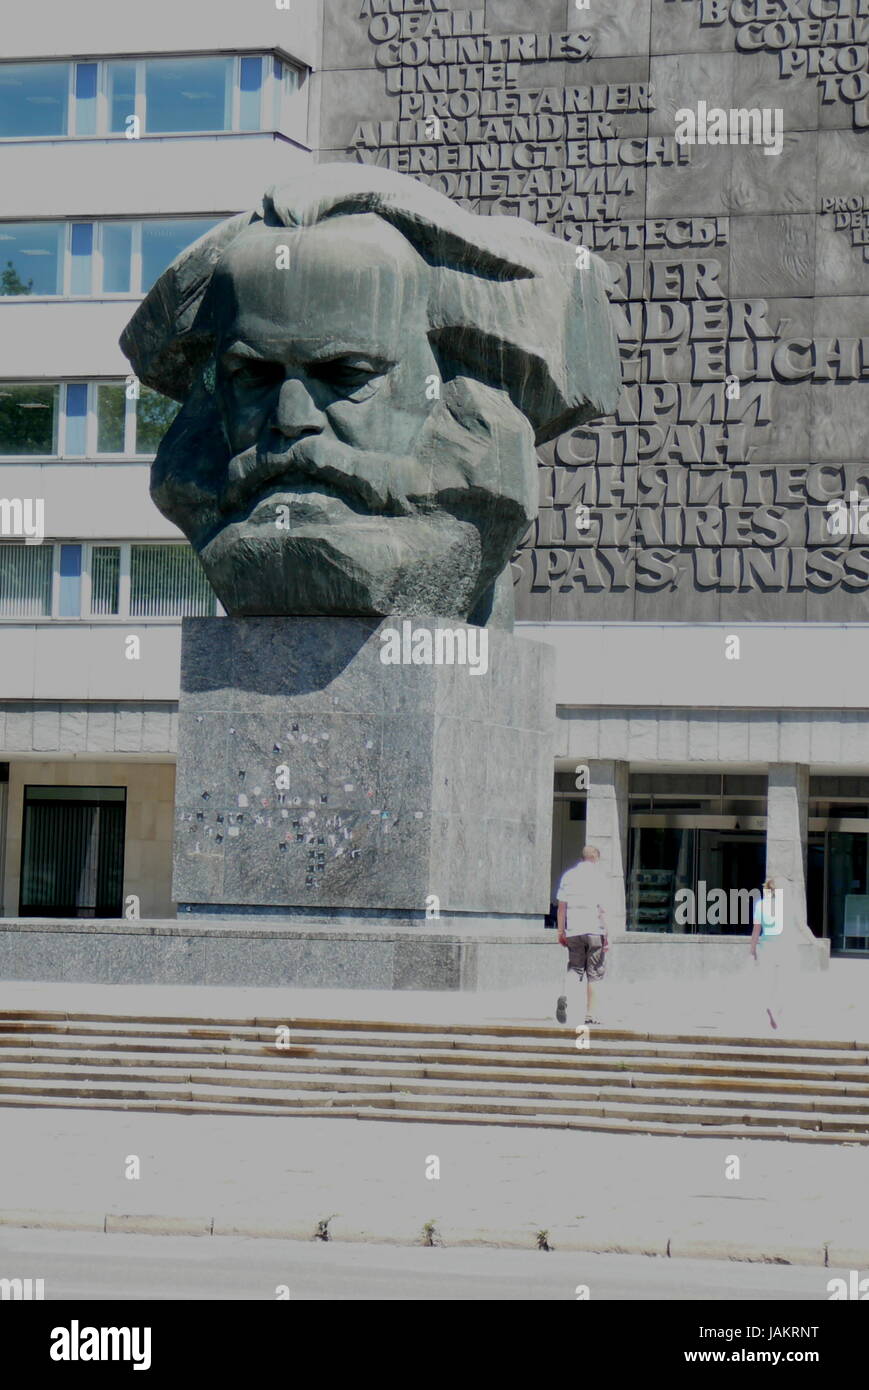 karl marx monument from gdr times in chemnitz (from lew kerbel) Stock Photo